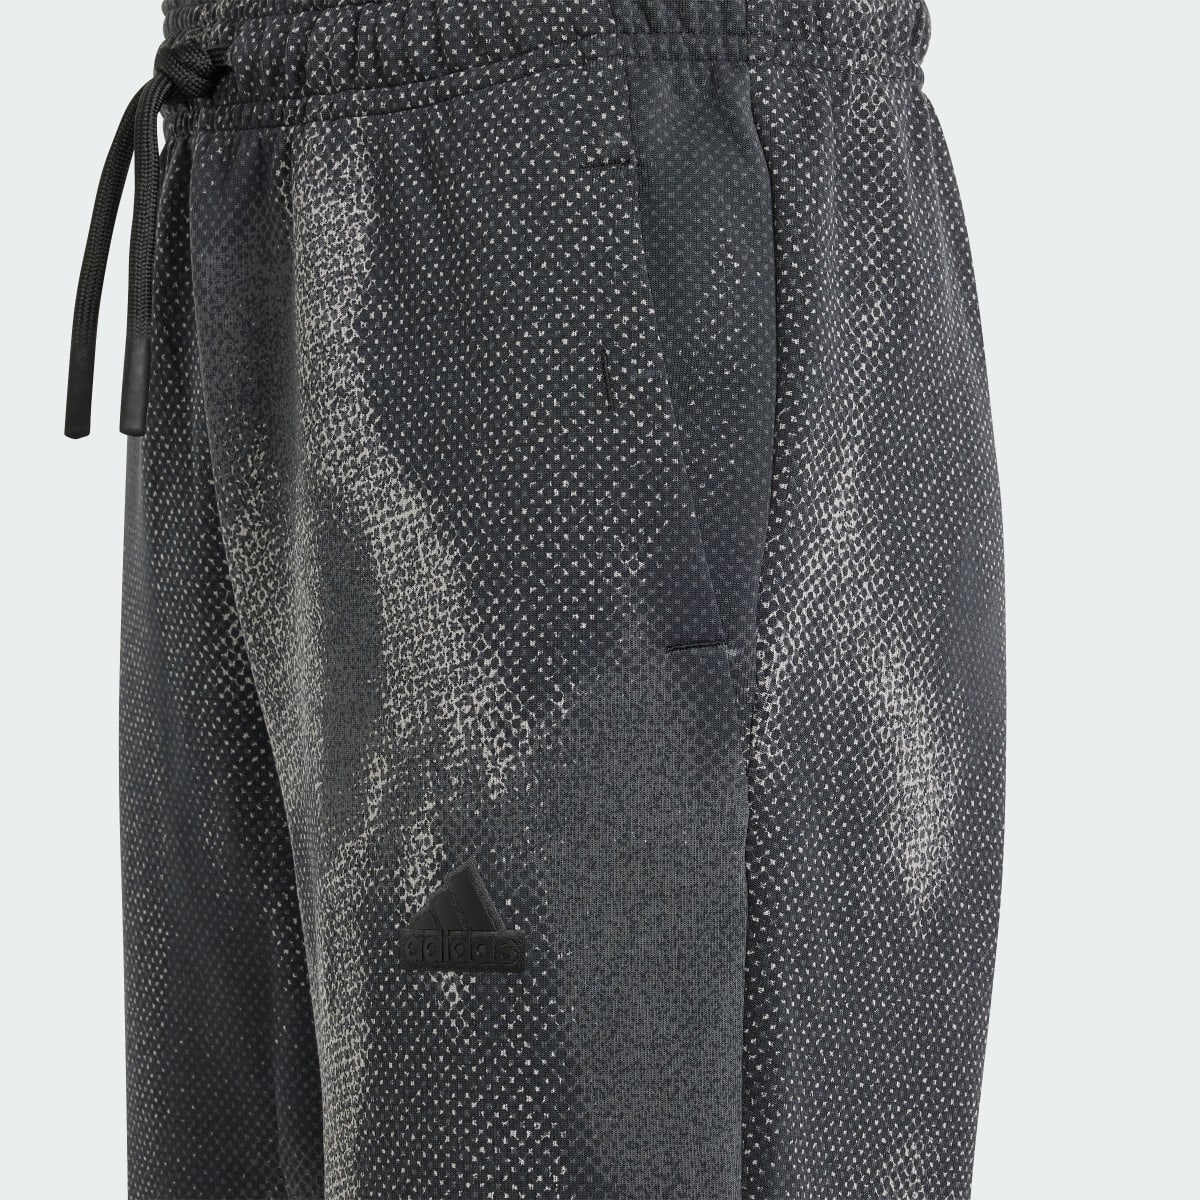 Adidas Future Icons Allover Print Ankle Length Pants Kids. 4